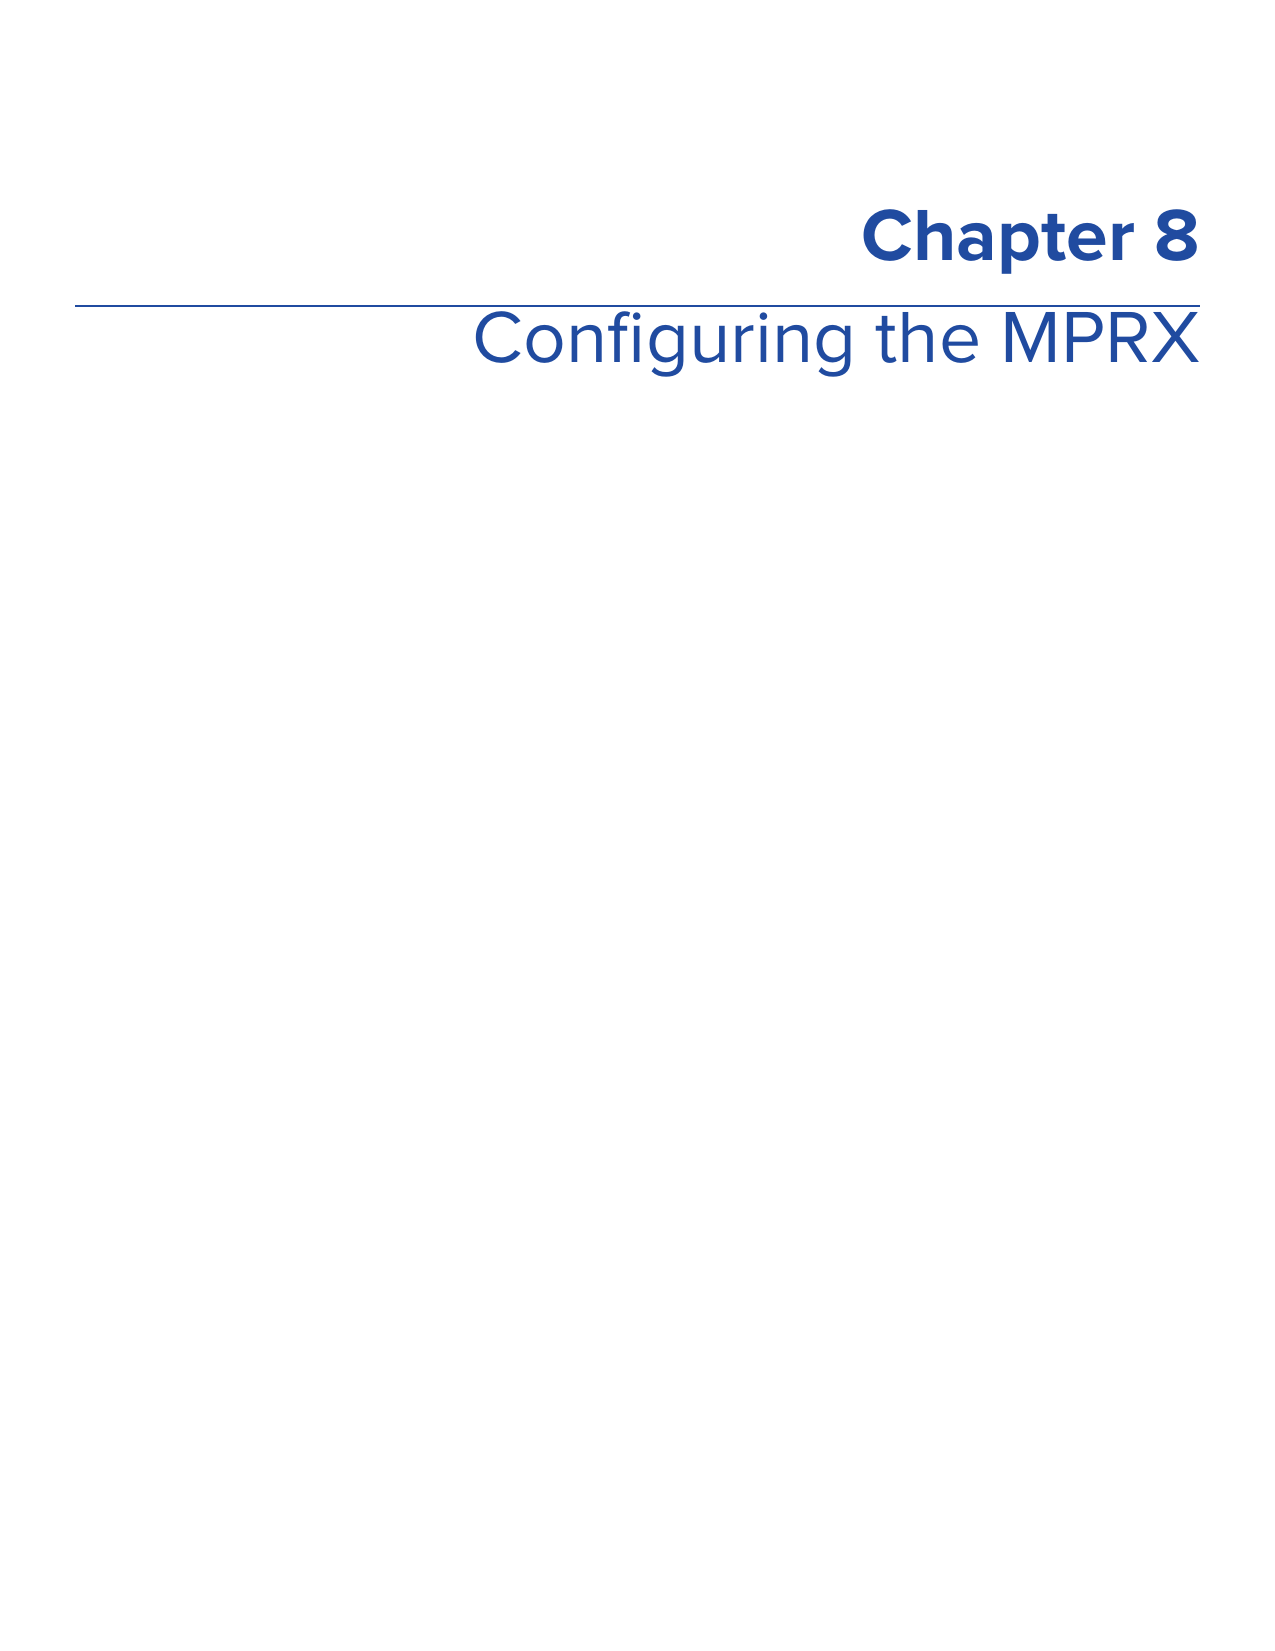  Chapter 8Conﬁguring the MPRX